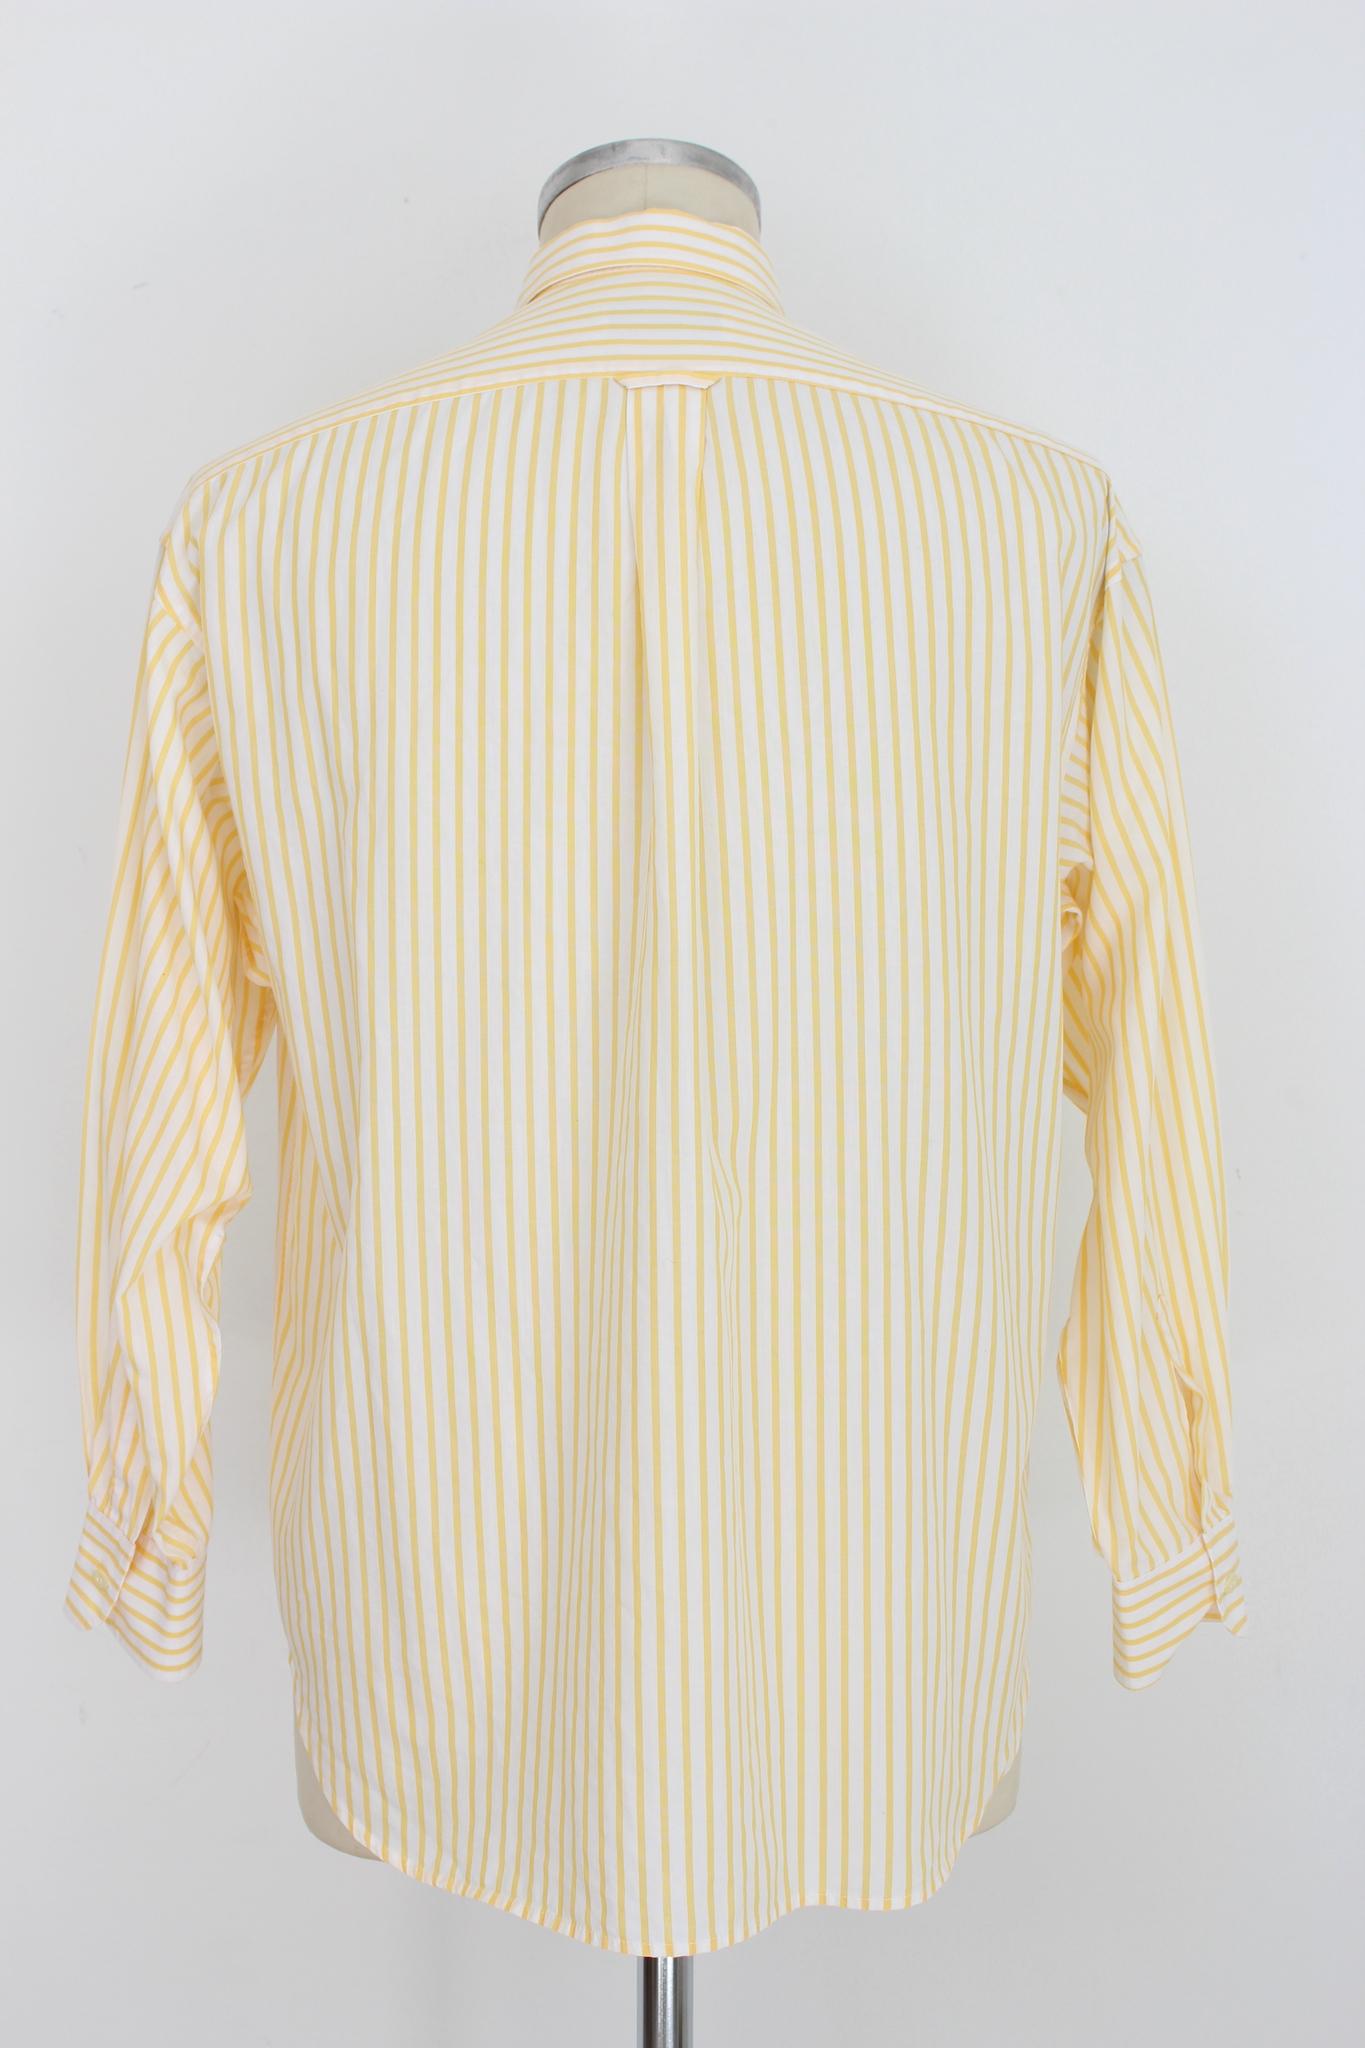 Burberry vintage 90s yellow and white striped shirt. Classic model, 100% cotton fabric. Made in France. The condition is very good, there are some small spots.

Size: L

Shoulder: 46 cm
Bust / Chest: 56 cm
Sleeve: 59 cm
Length: 73 cm
